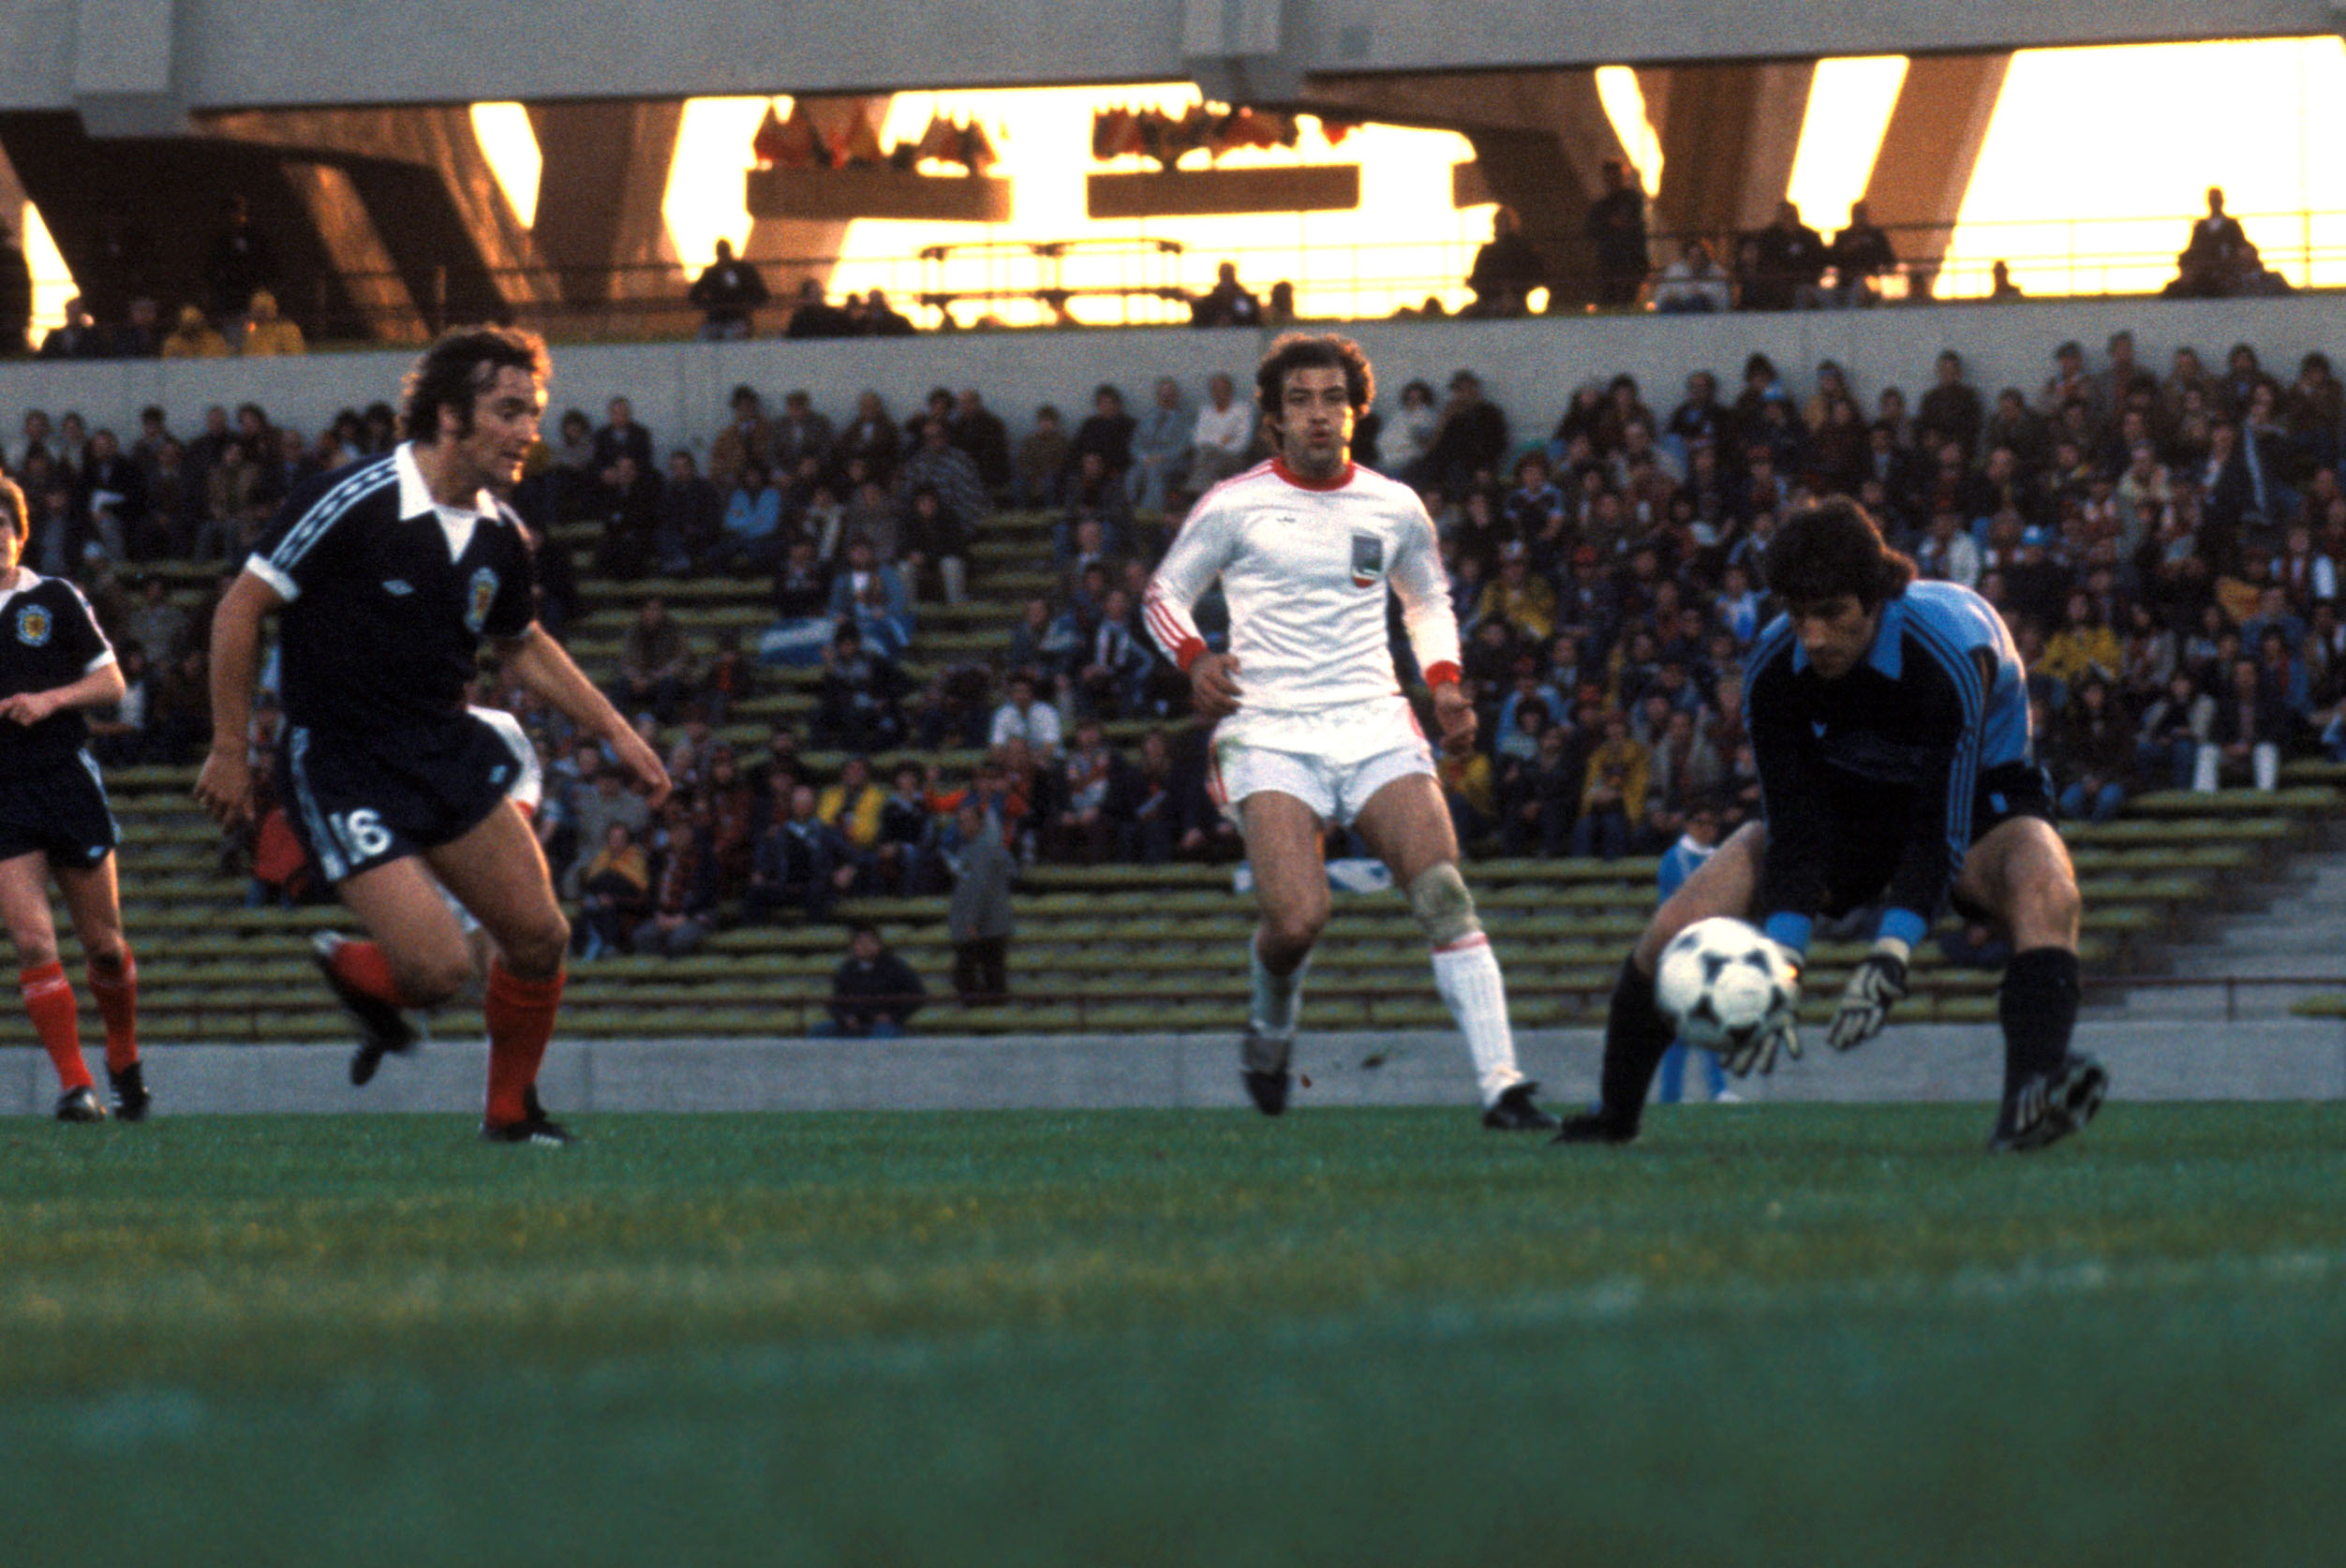 Scotland saw their 1978 World Cup hopes scuppered by Iran.